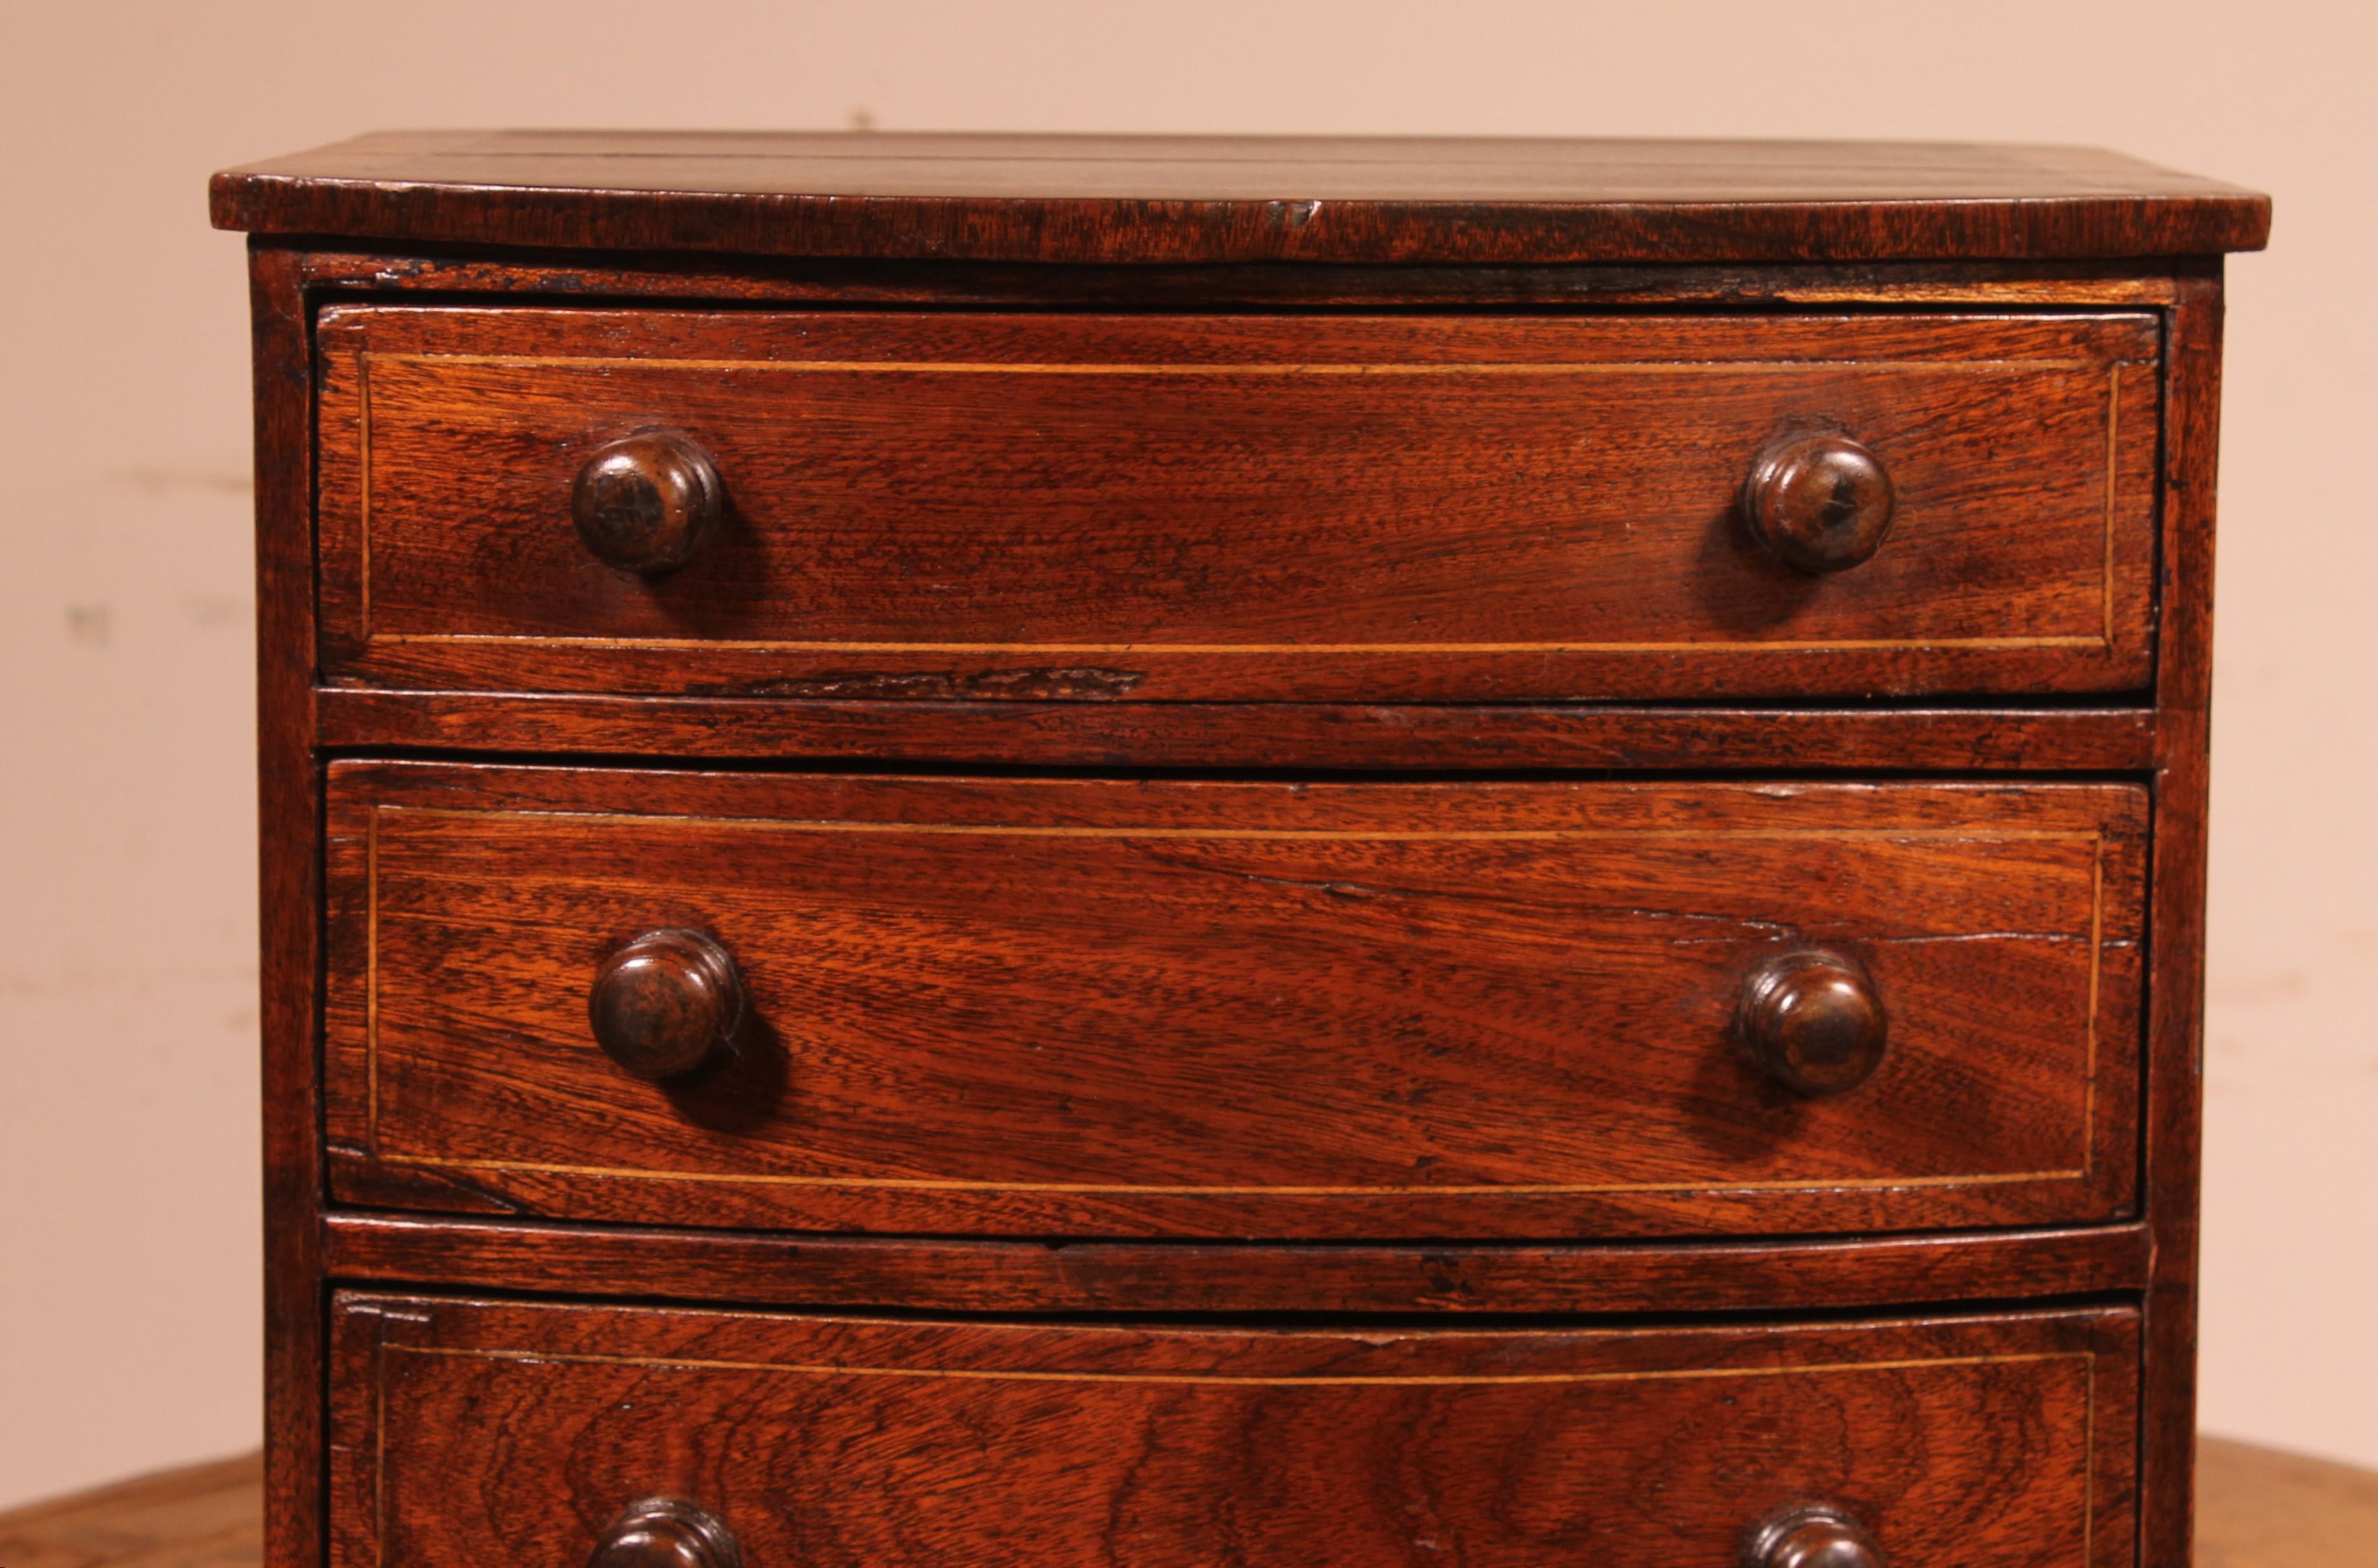 Lovely 19th century Miniature Chest Of Drawers chest of drawers from England

Bowfront miniature chest decorated with lemon tree inlays on the drawers and walnut inlays on the top

in very good condition and beautiful patina.